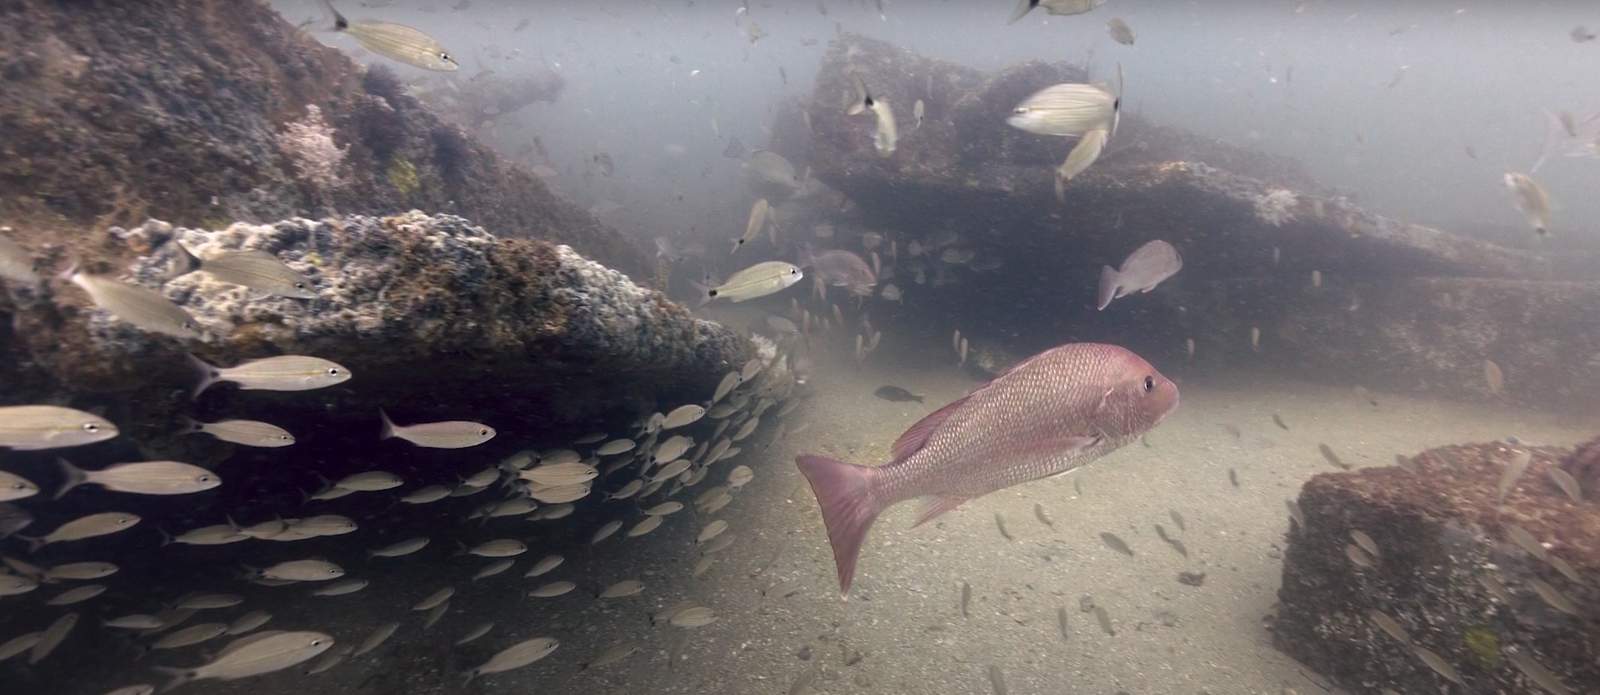 Local artificial reef weathers storms and attracts fish